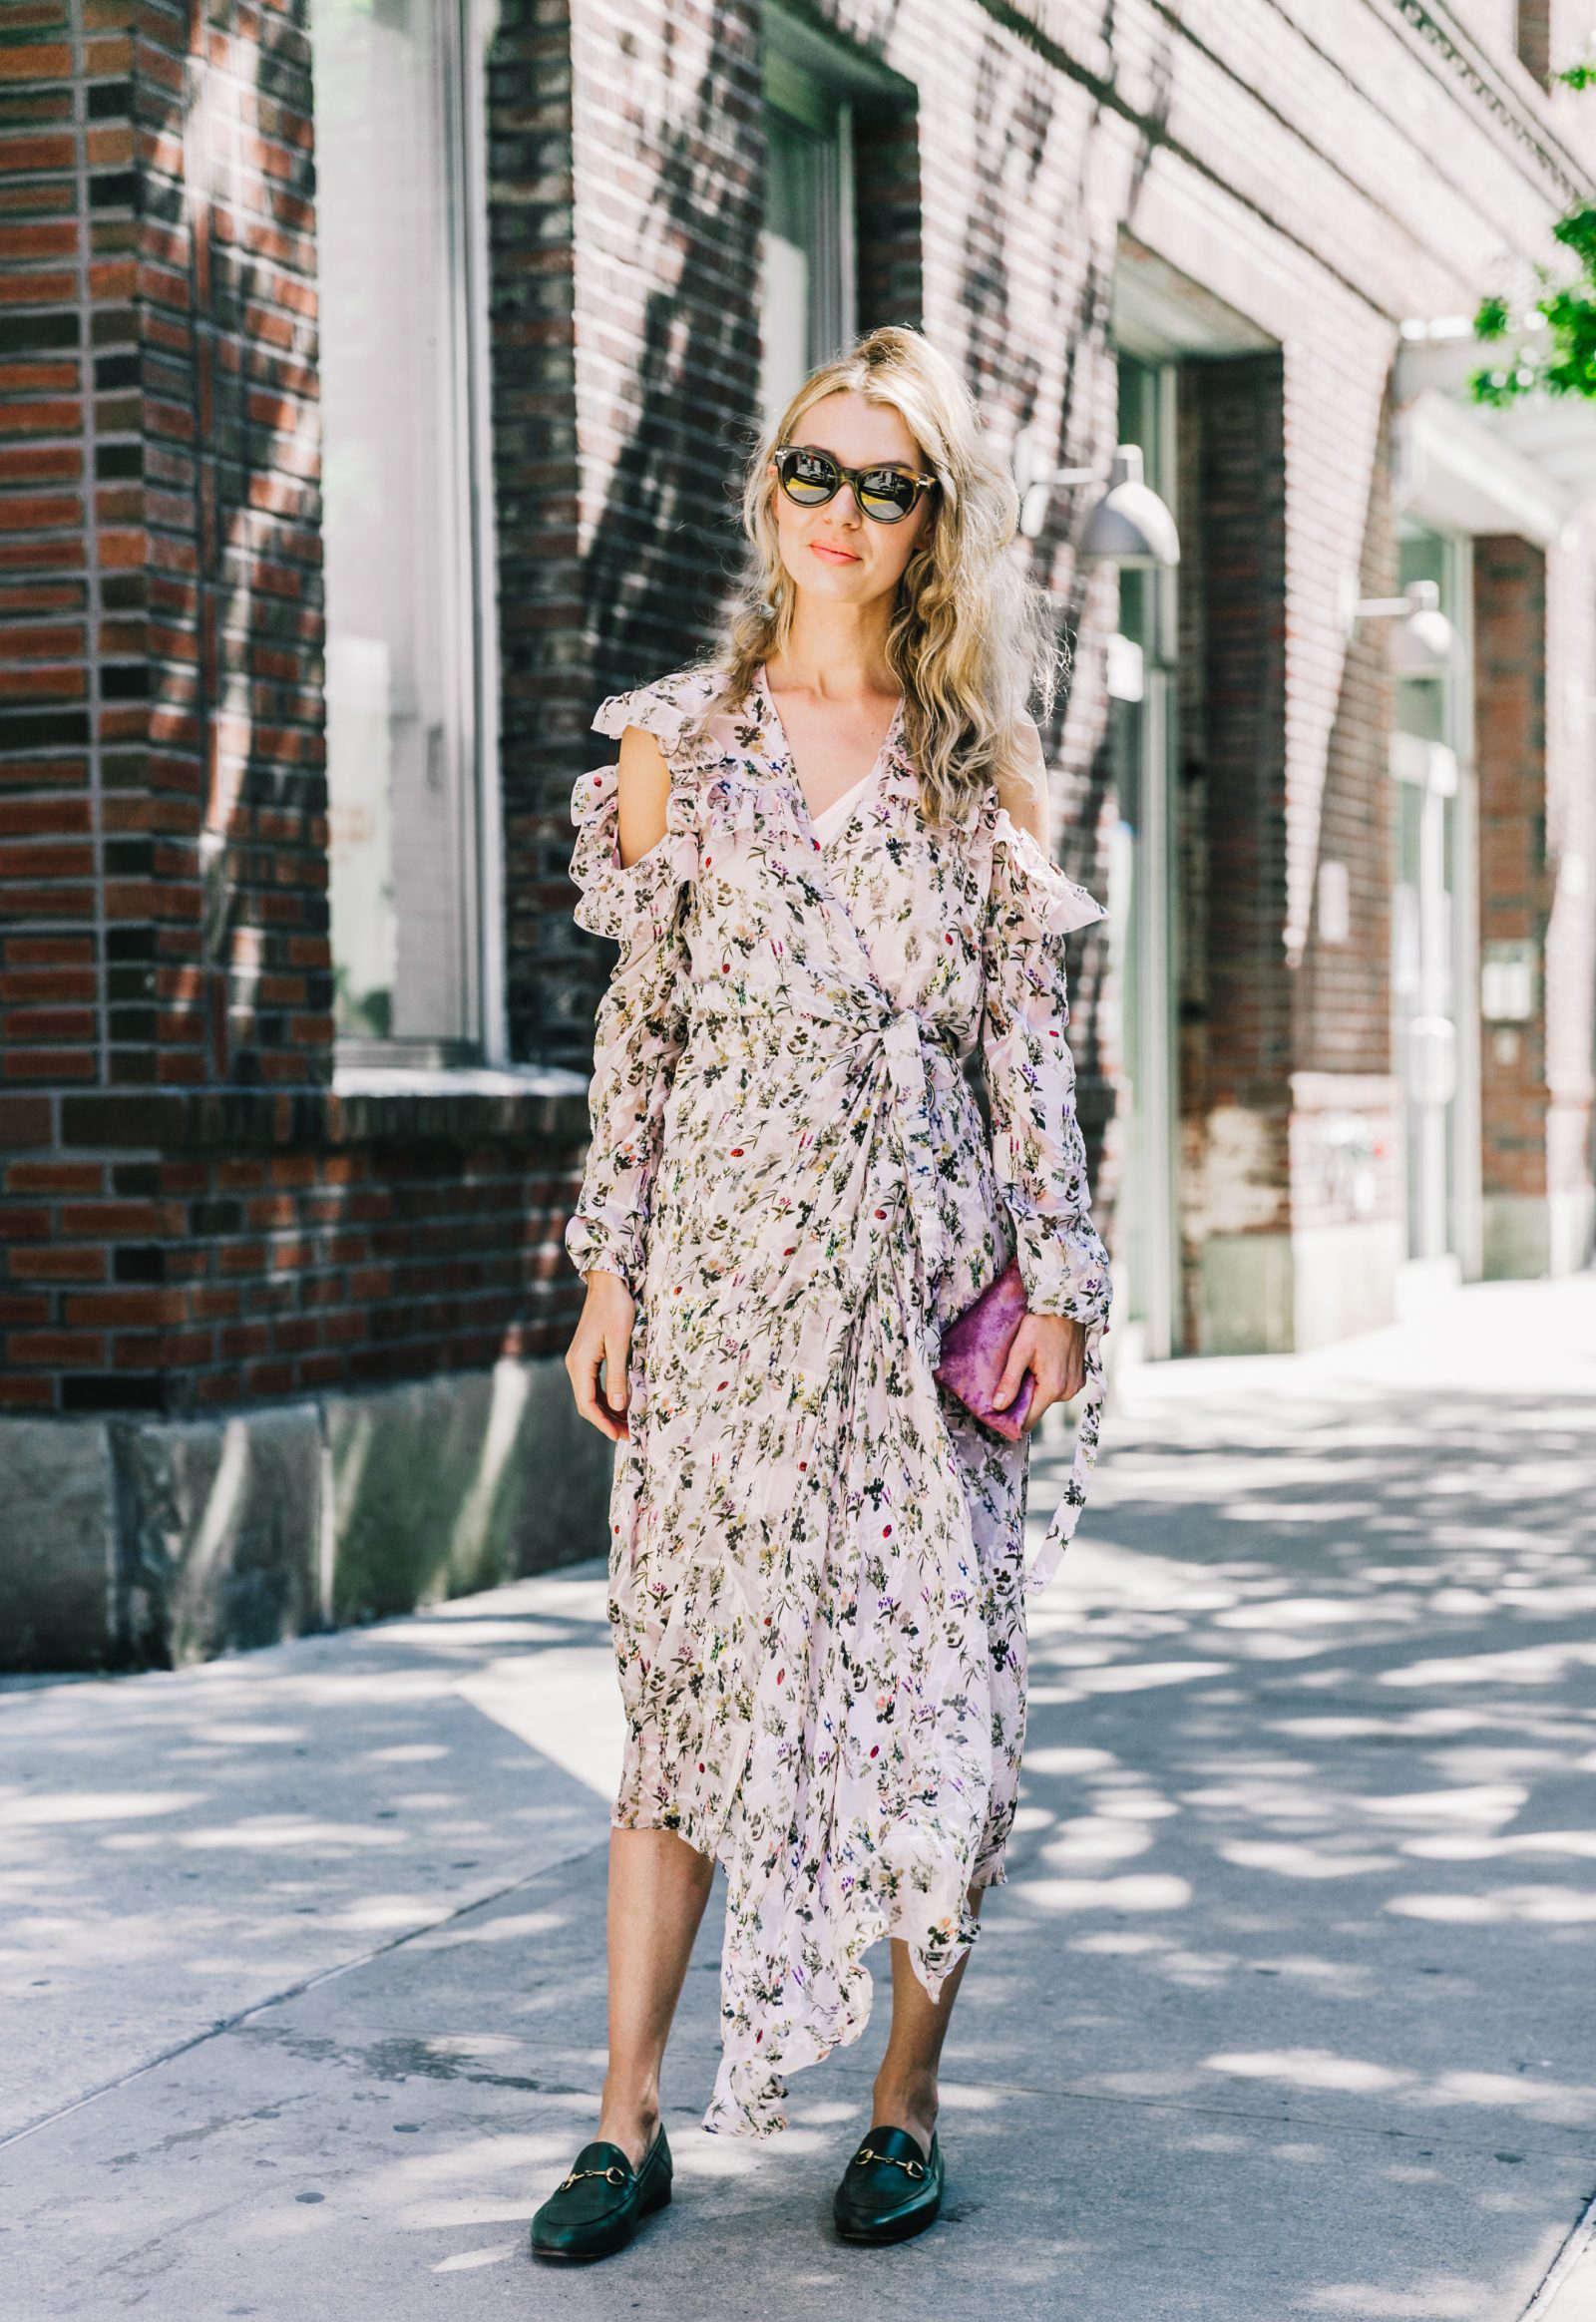 How to Style Your Summer Dress | Who What Wear